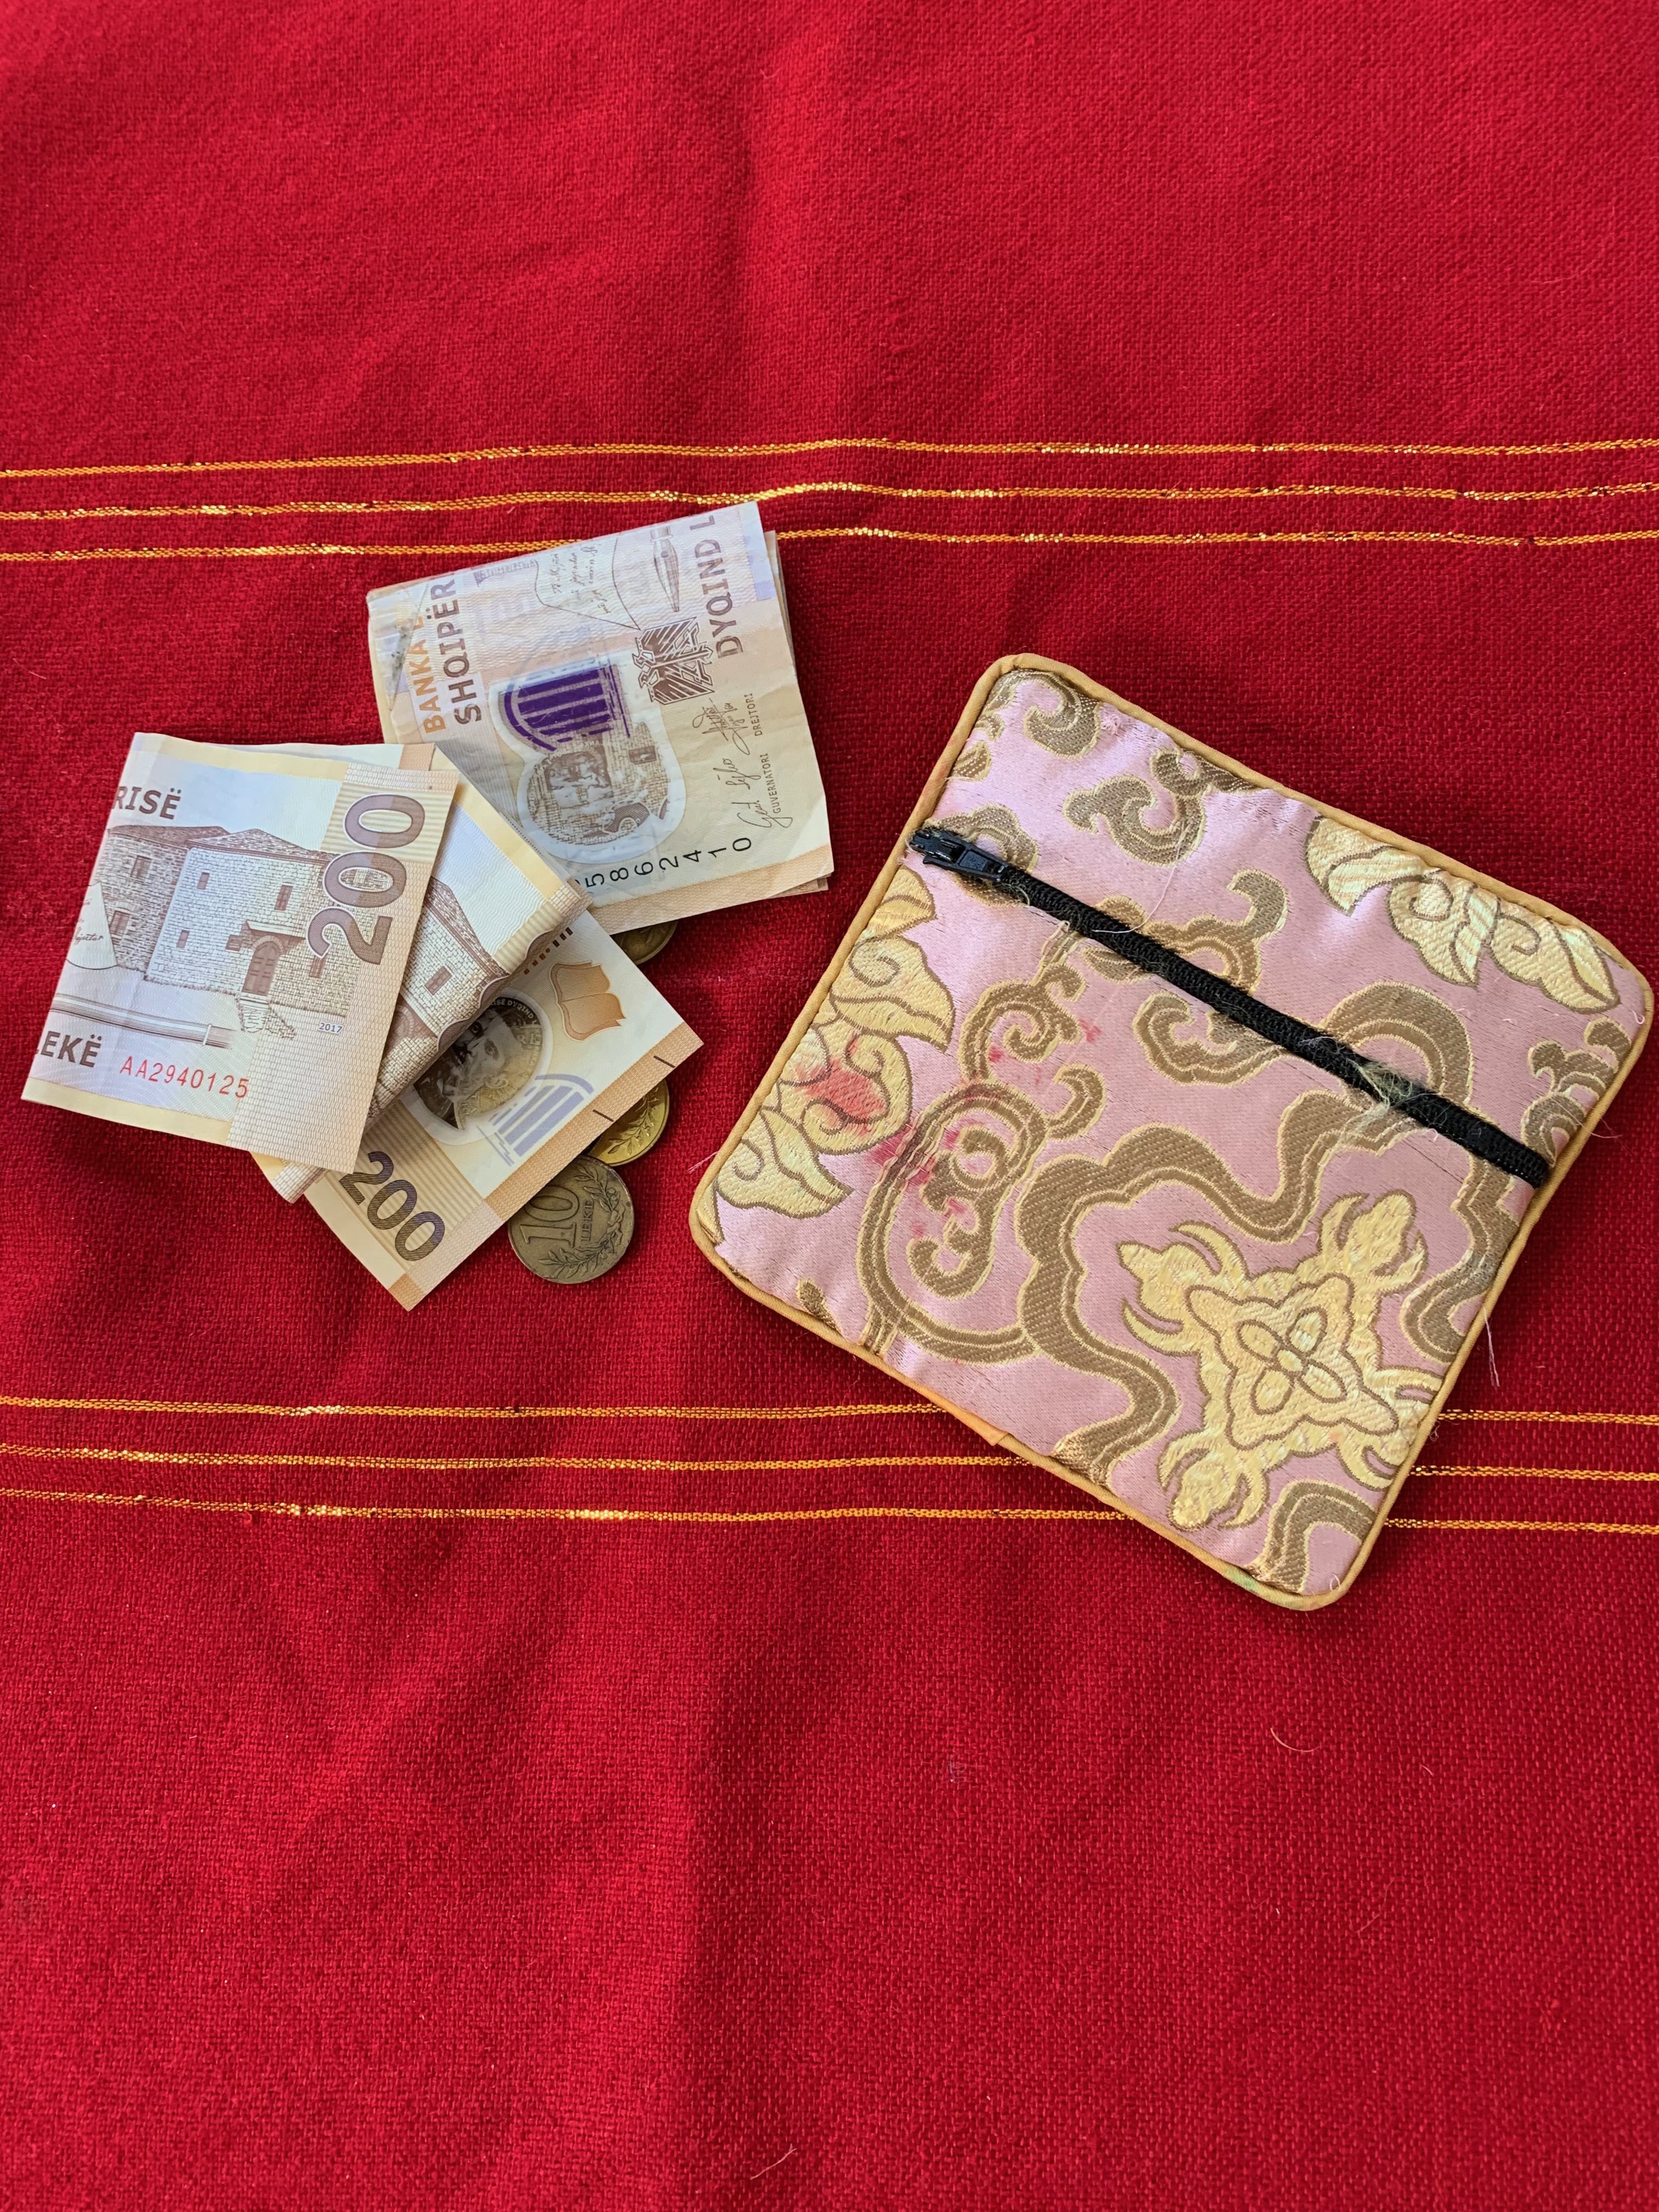 Fabric purse and Albanian notes and coins